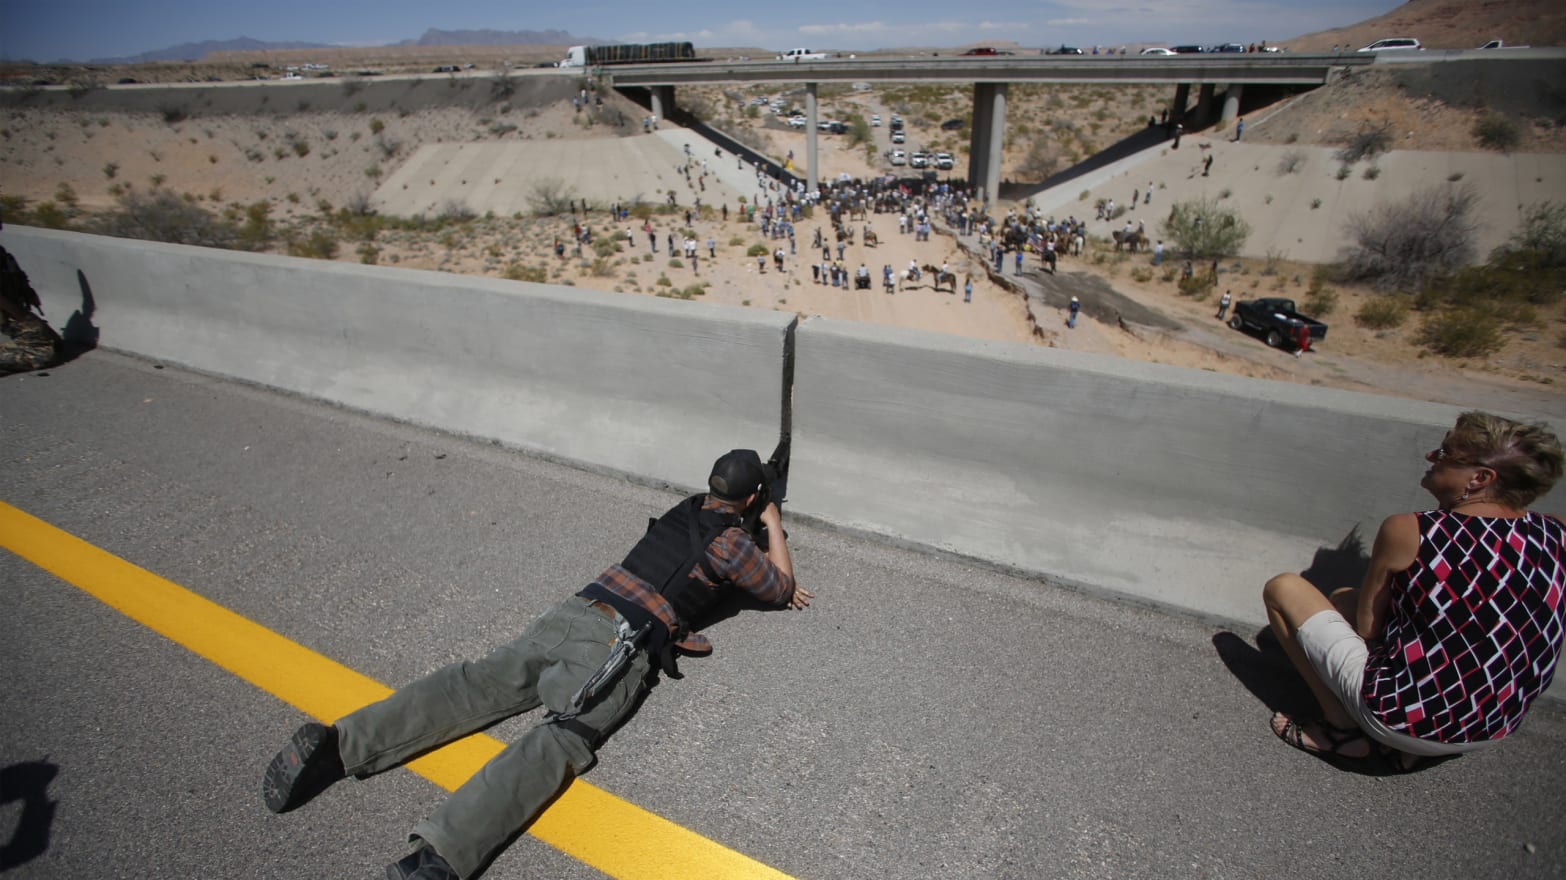 Cliven Bundy 'Protesters' Allegedly Pointed Rifles at Feds